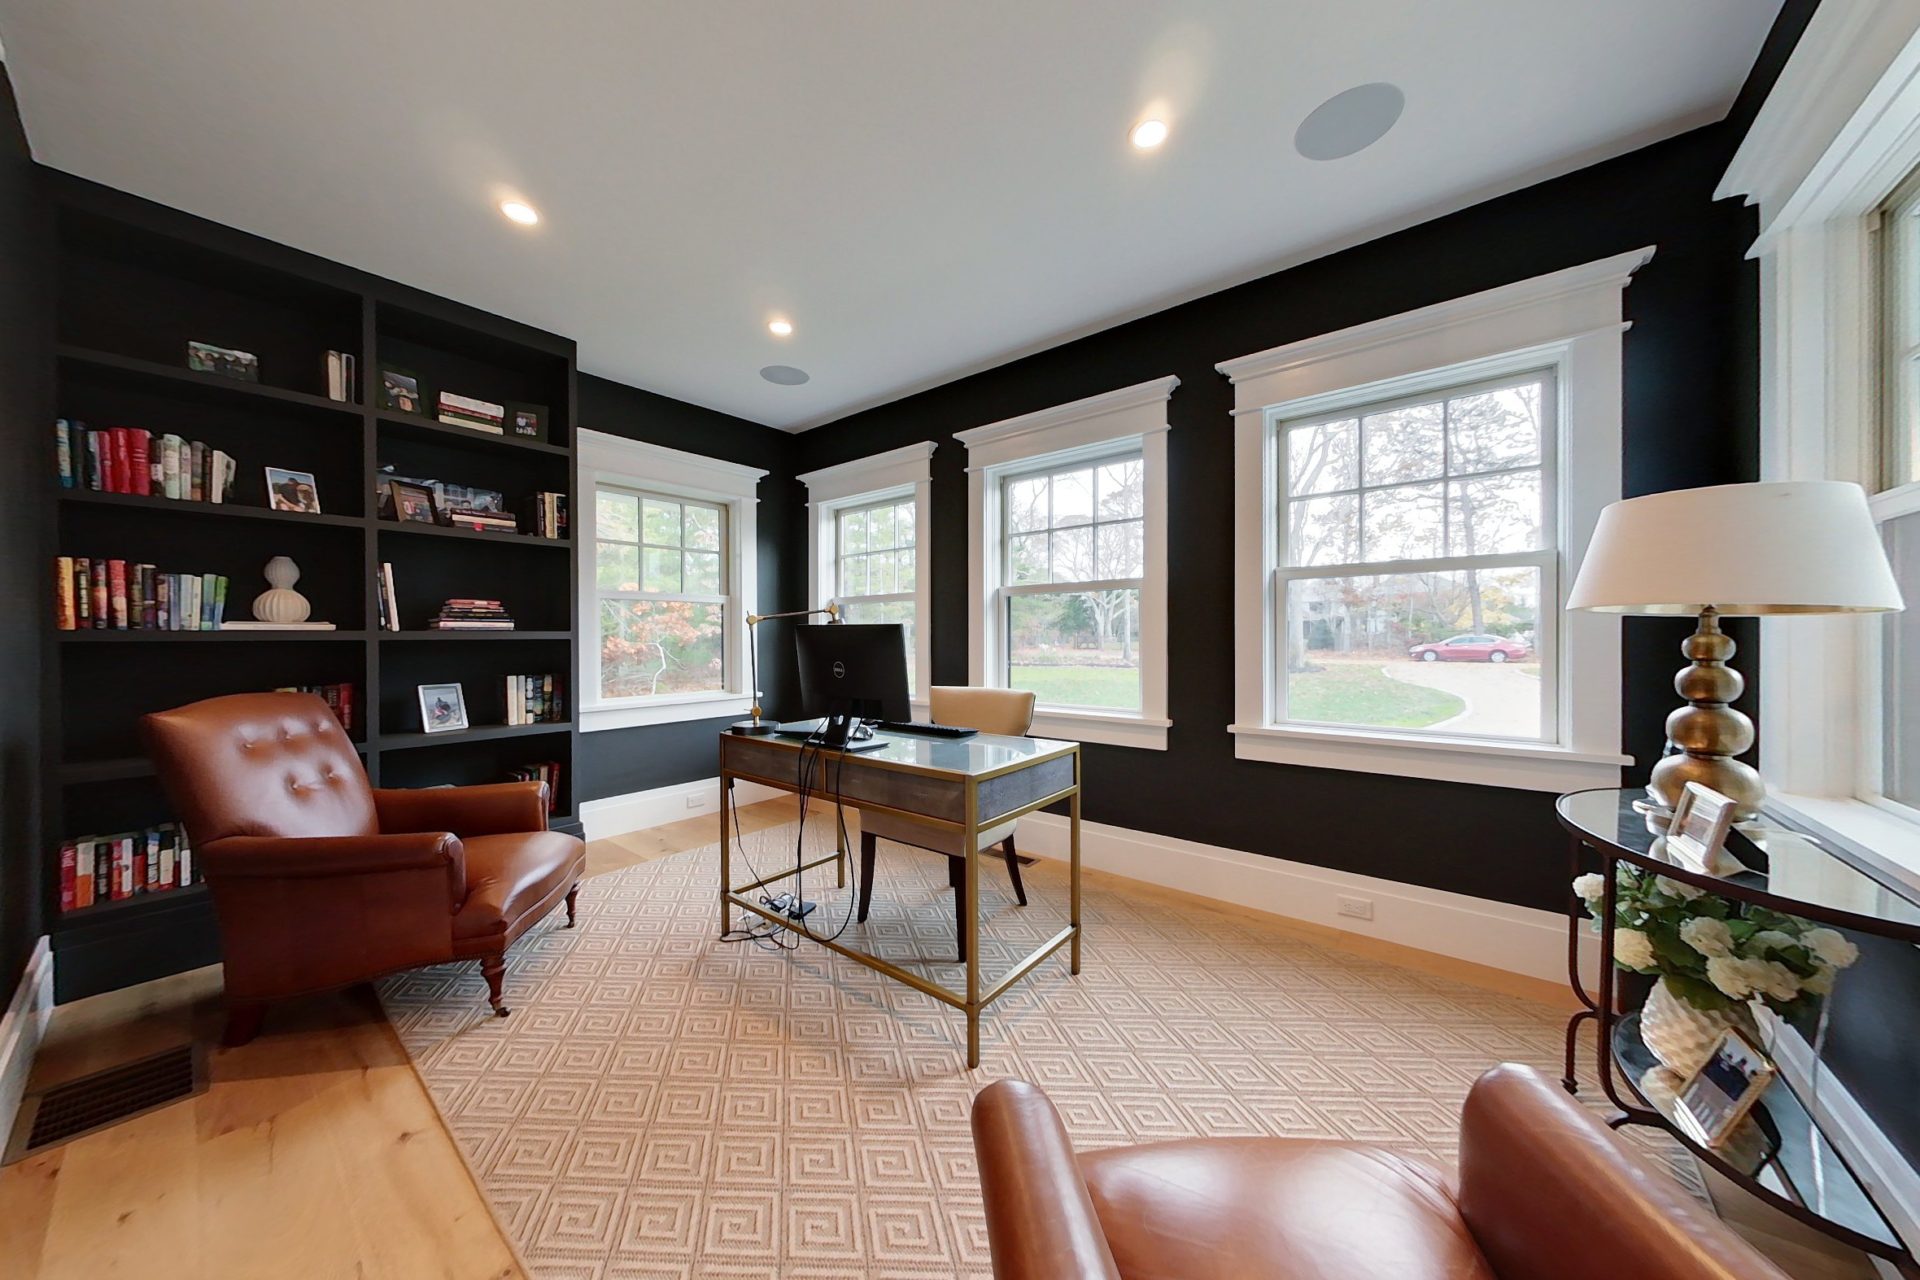 Image of the home office in a 2-story colonial style home in Osterville, MA.